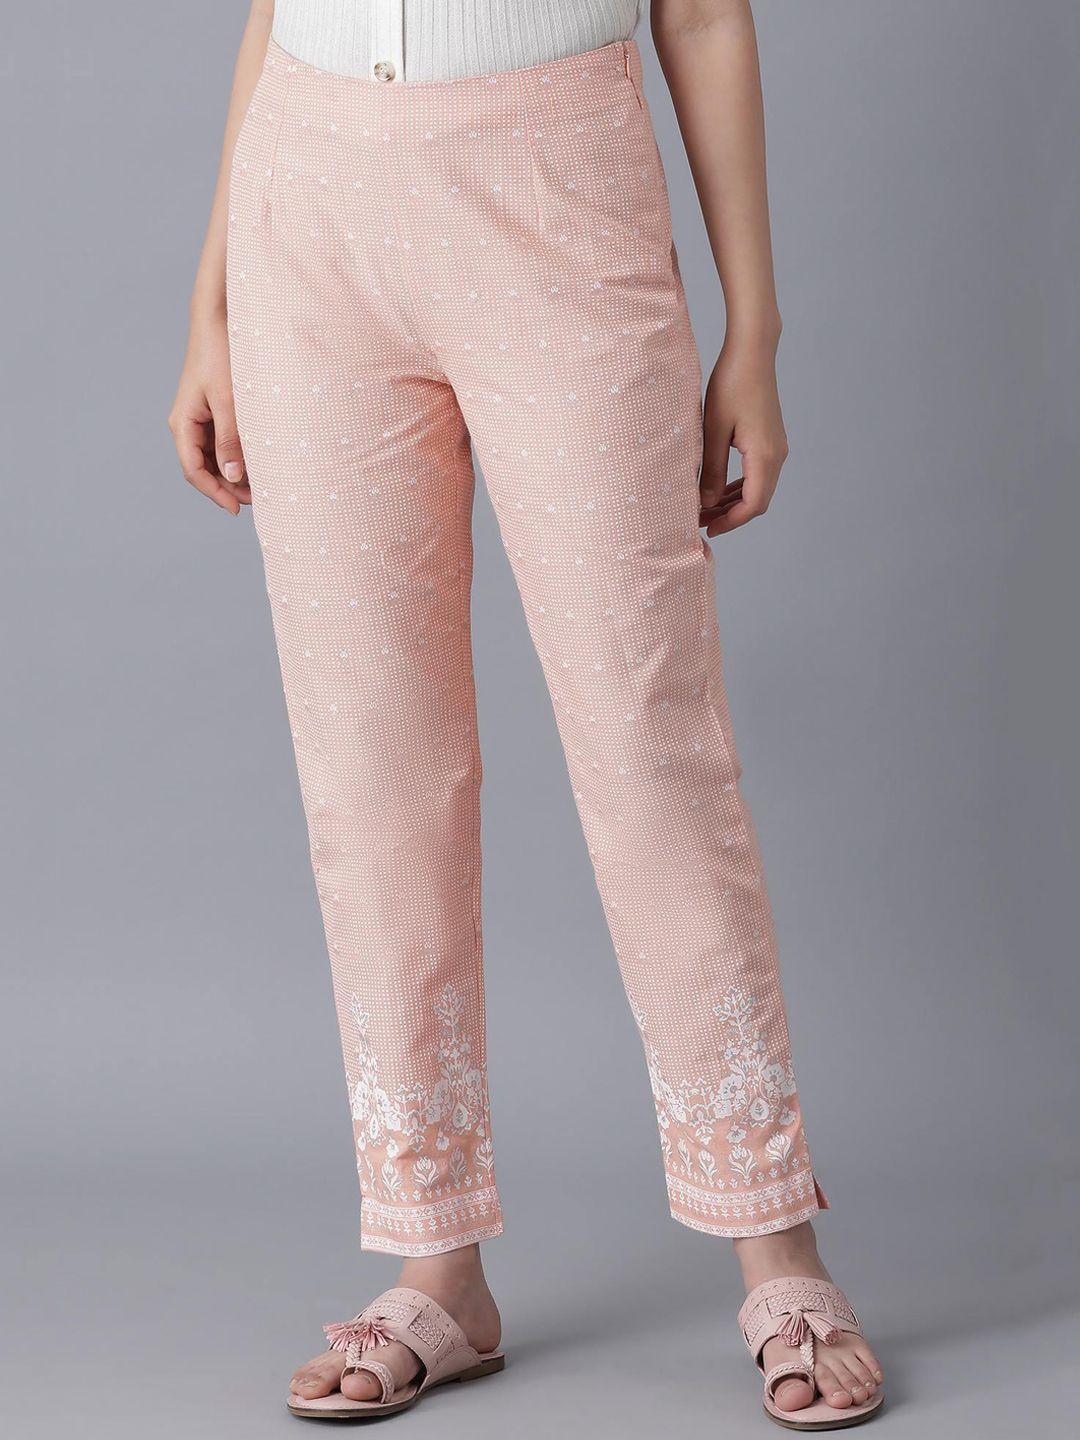 w women peach-coloured & off-white slim fit printed trousers